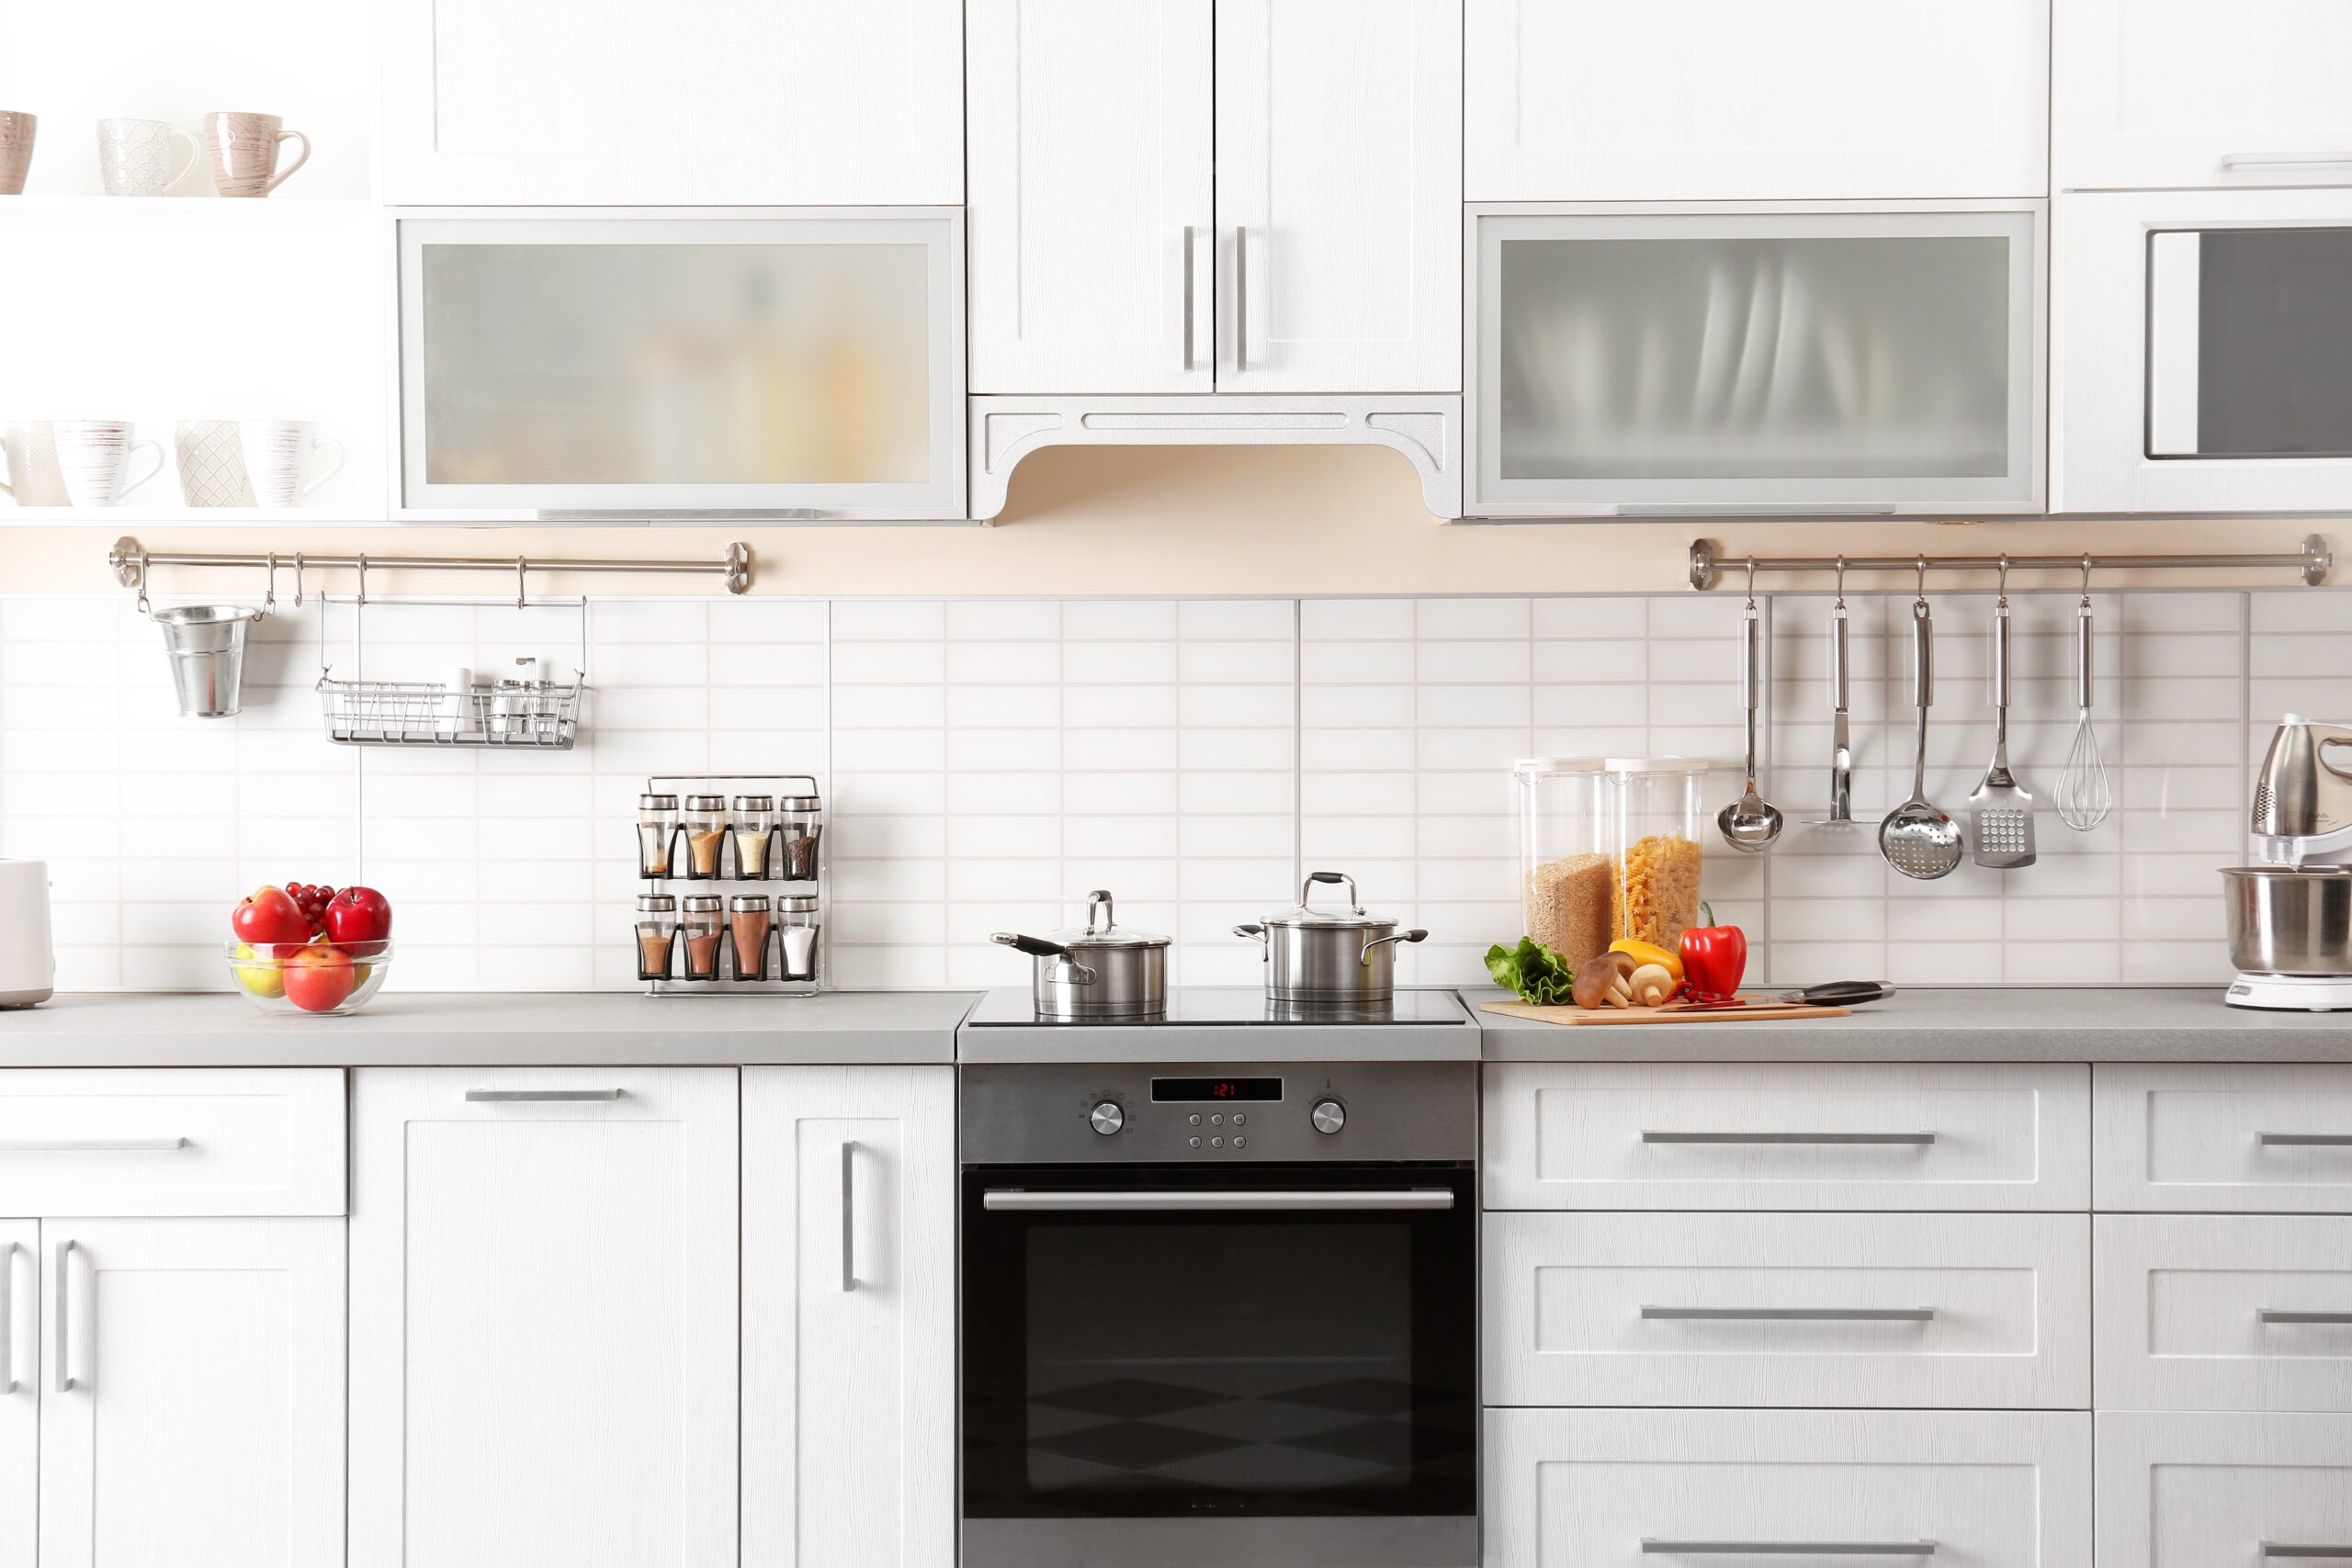 A Step-by-Step Guide to Cleaning Your Kitchen Photo